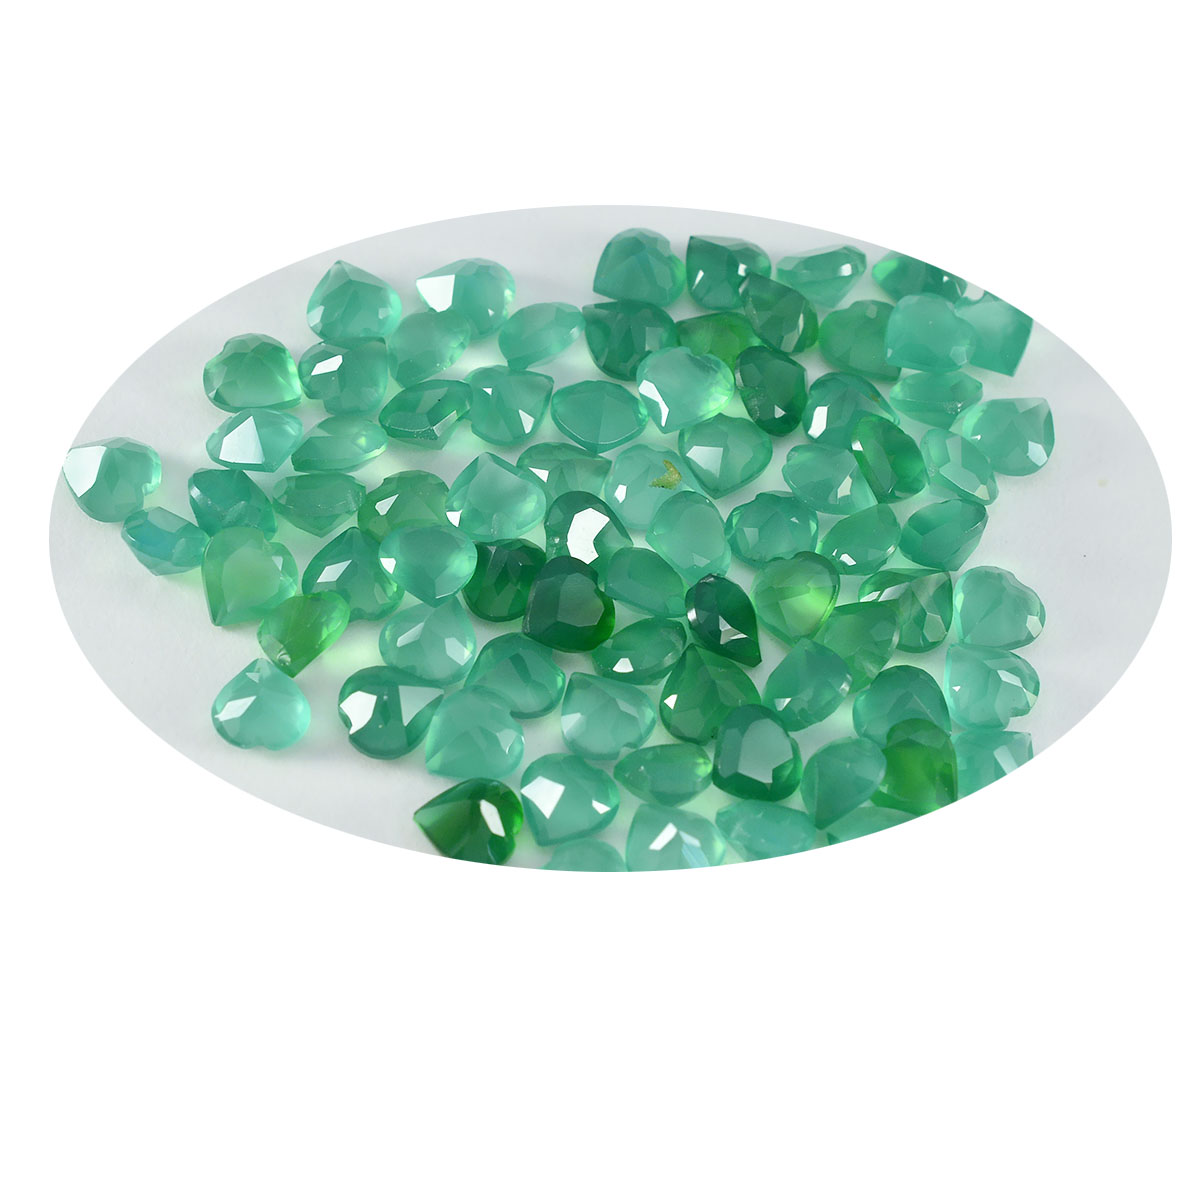 Riyogems 1PC Genuine Green Onyx Faceted 5x5 mm Heart Shape attractive Quality Loose Gemstone